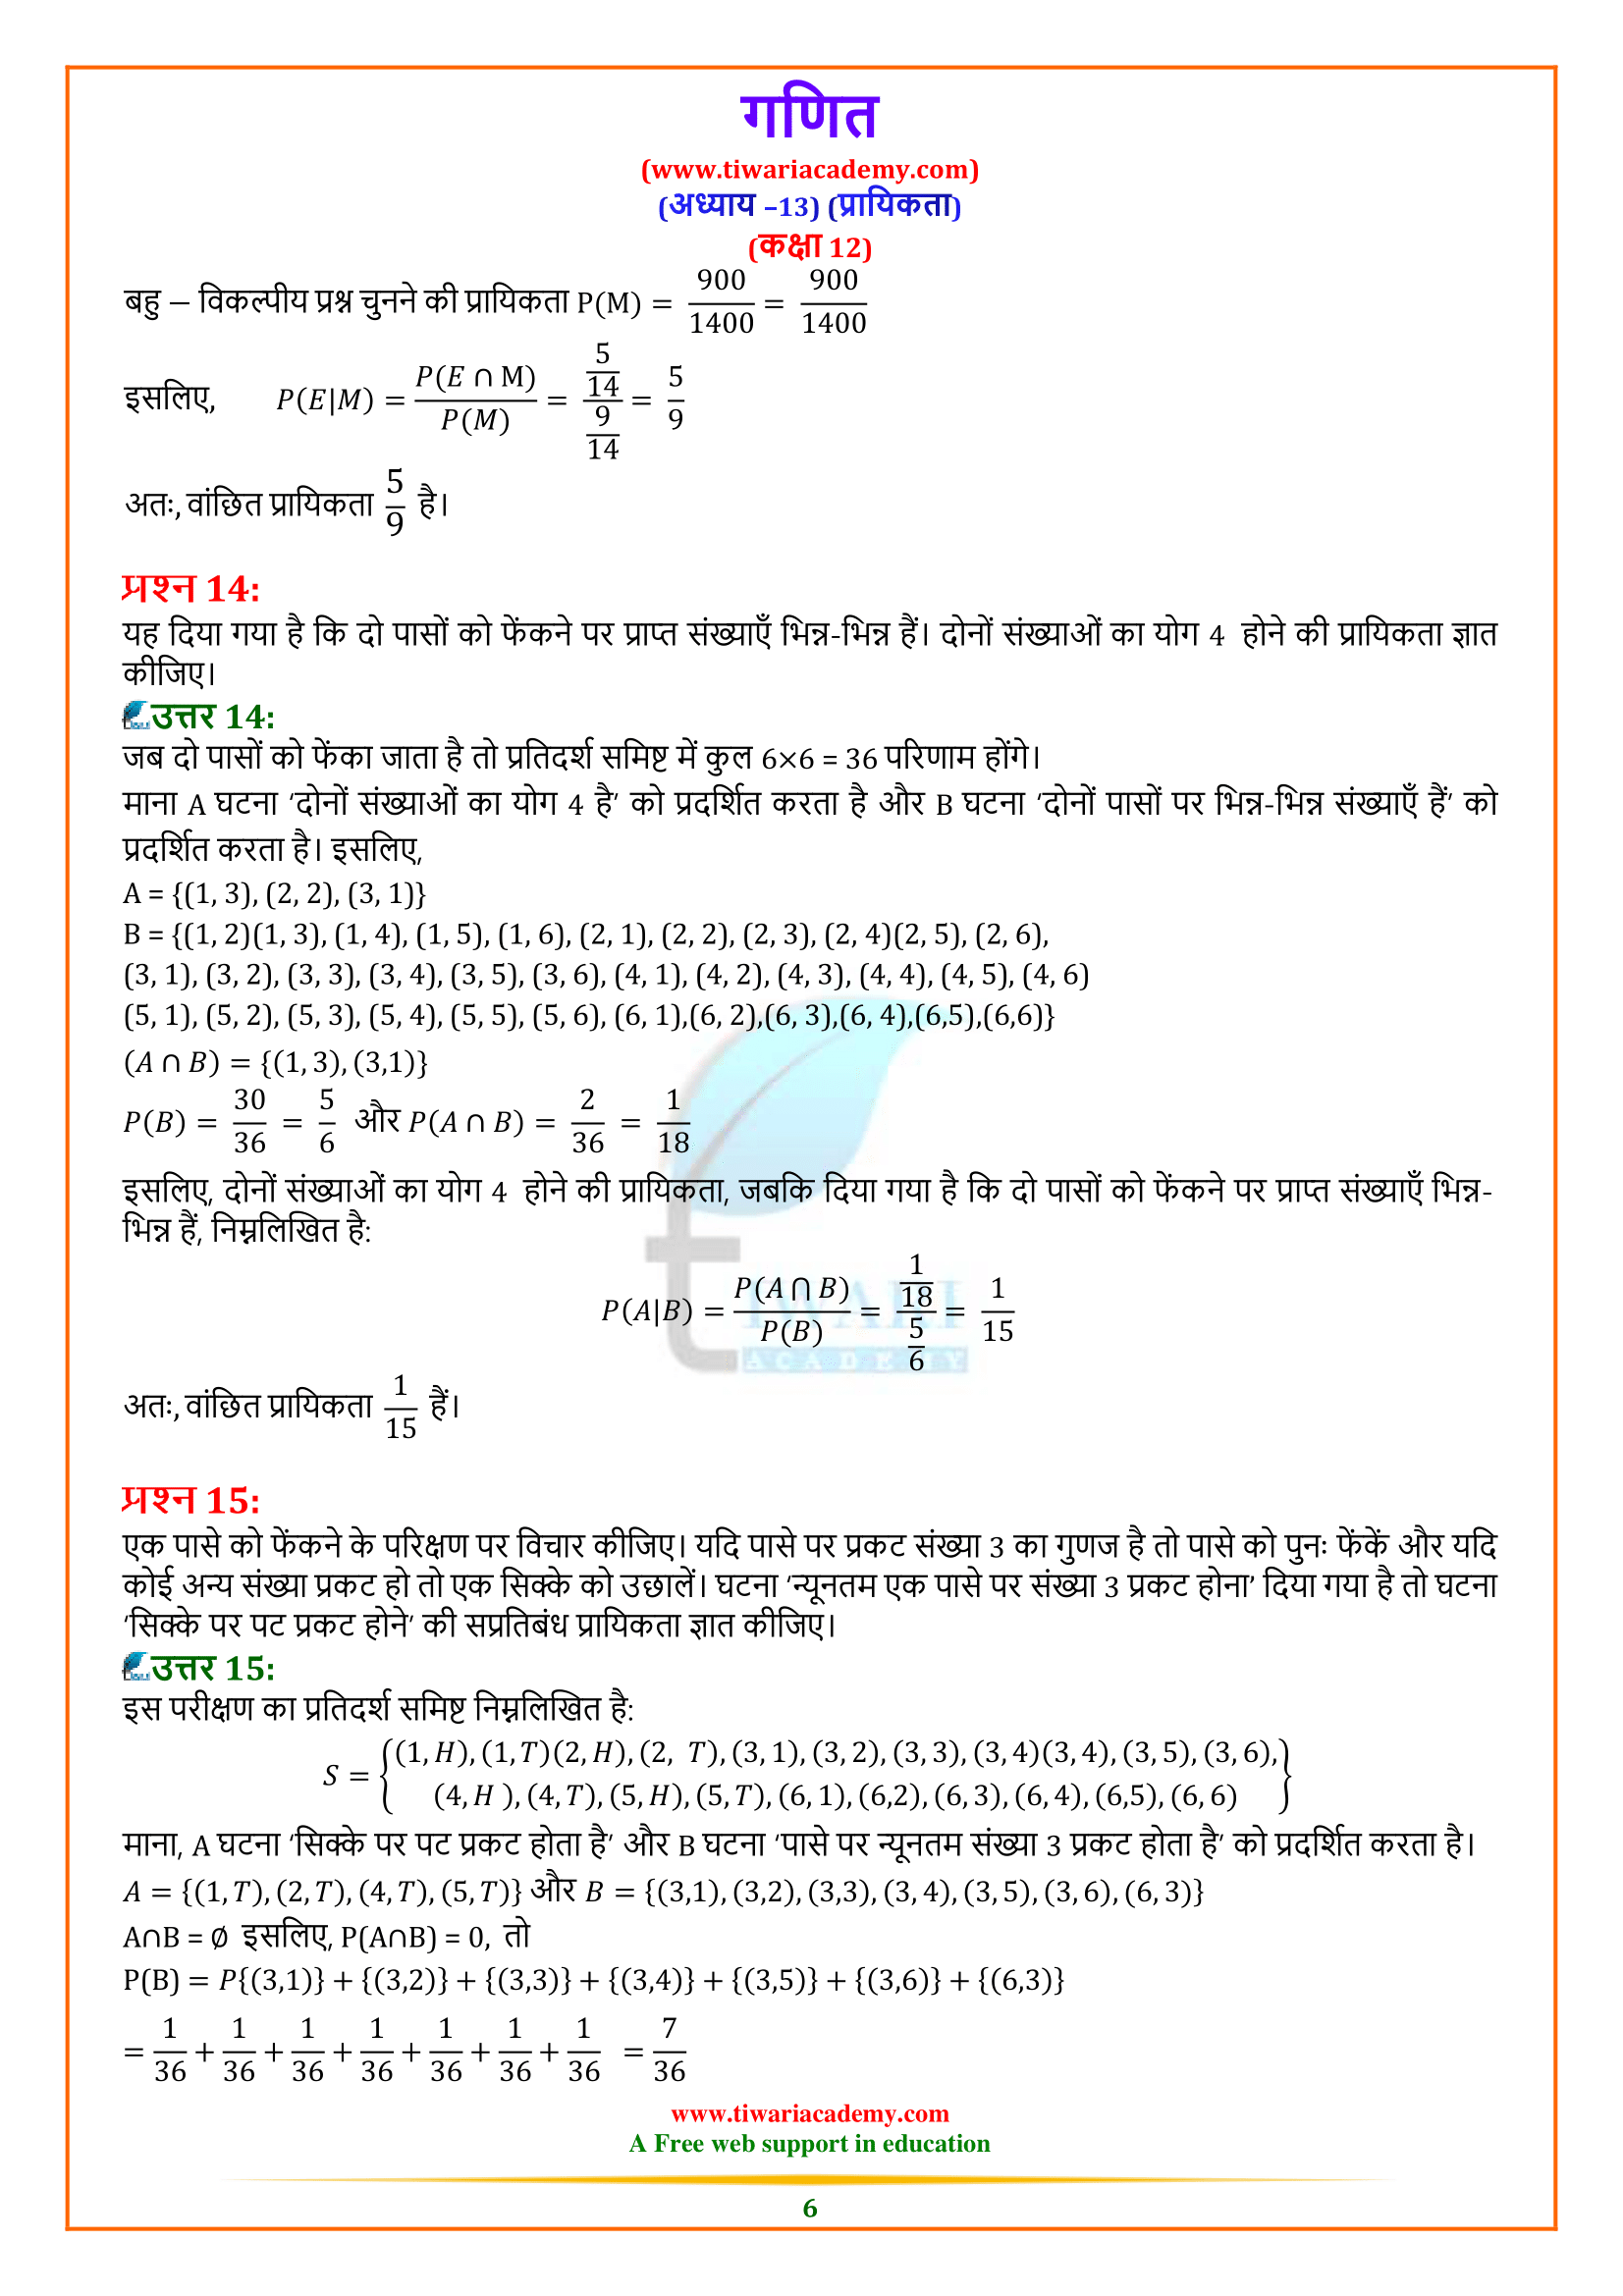 Class 12 Maths Chapter 13 Exercise 13.1 in Hindi Medium for mp board